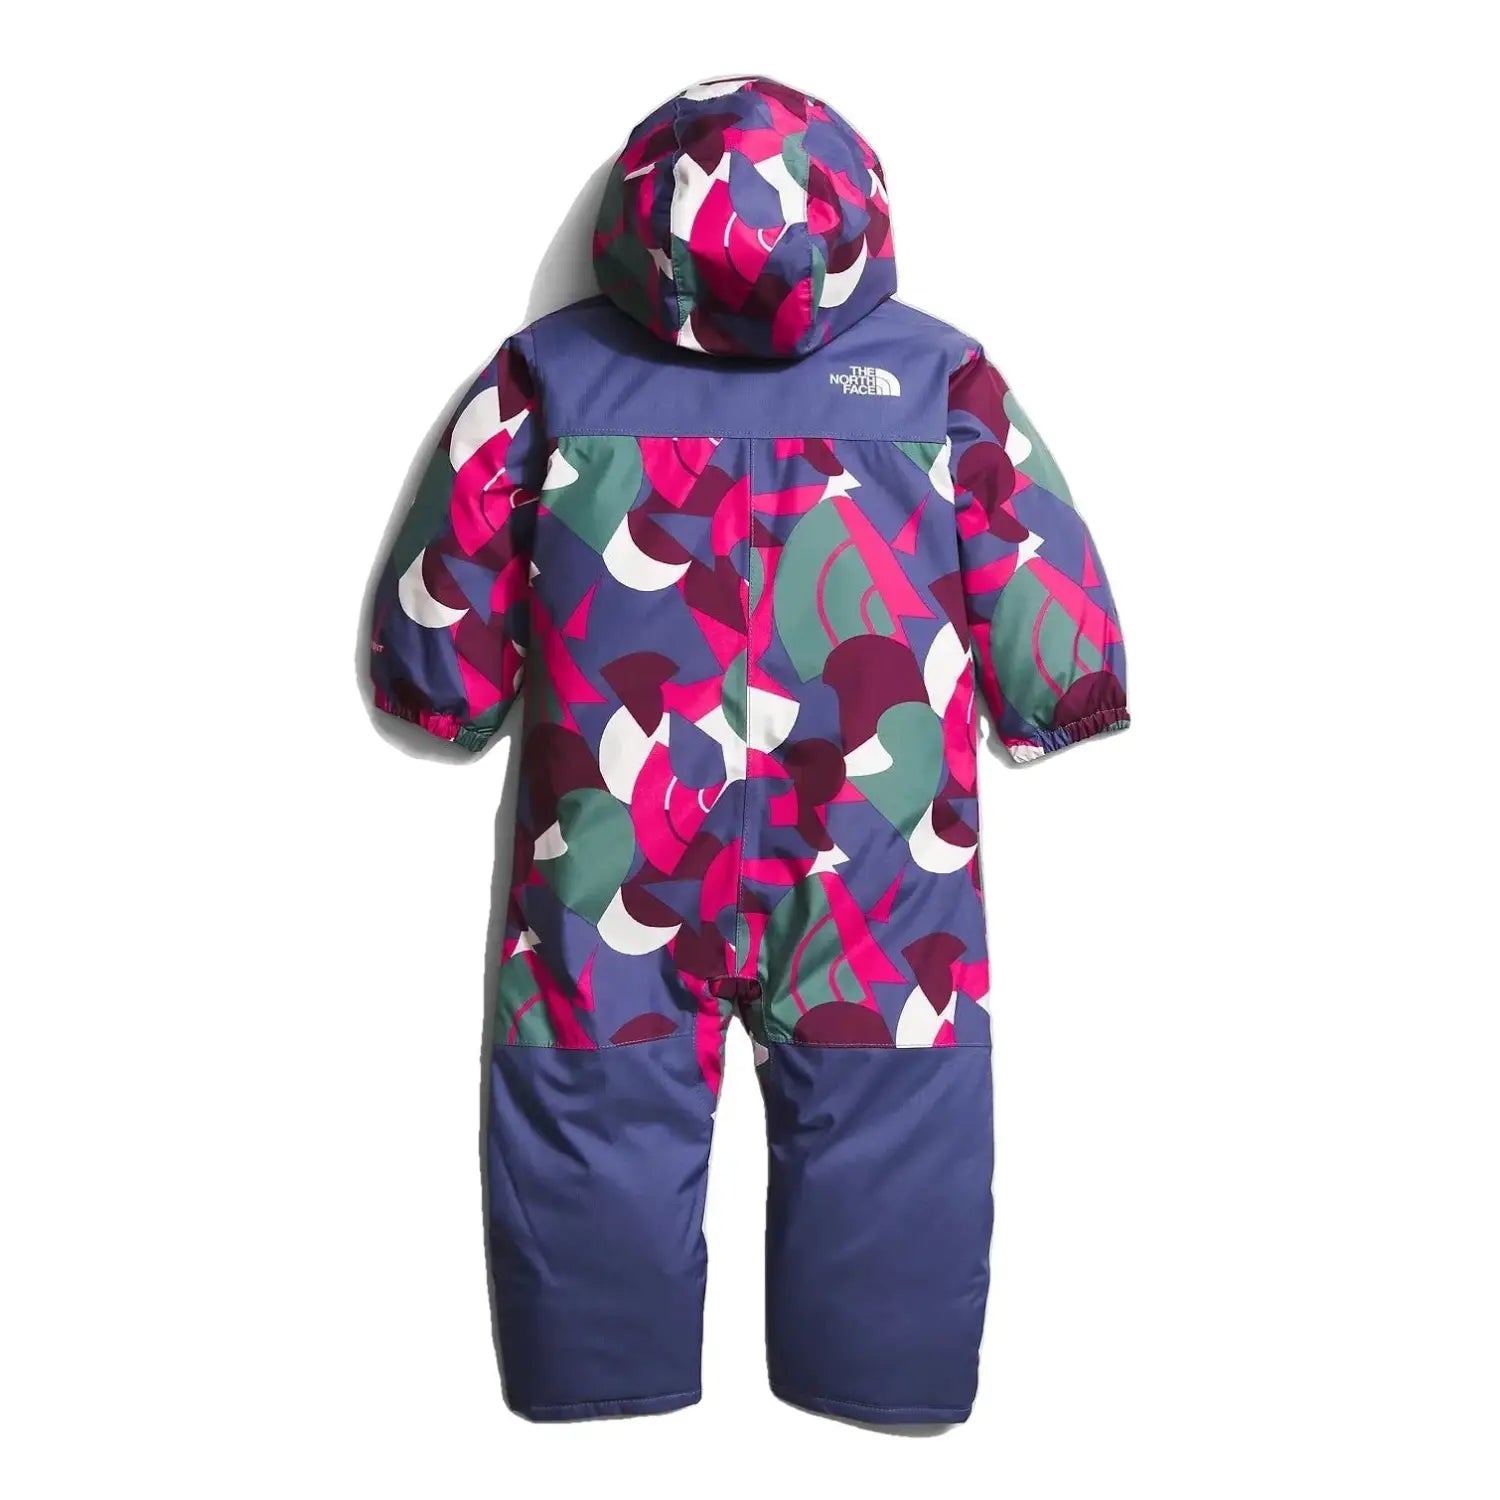 The North Face Baby Freedom Snowsuit shown in Mr. Pink Big Abstract Print. Back view.